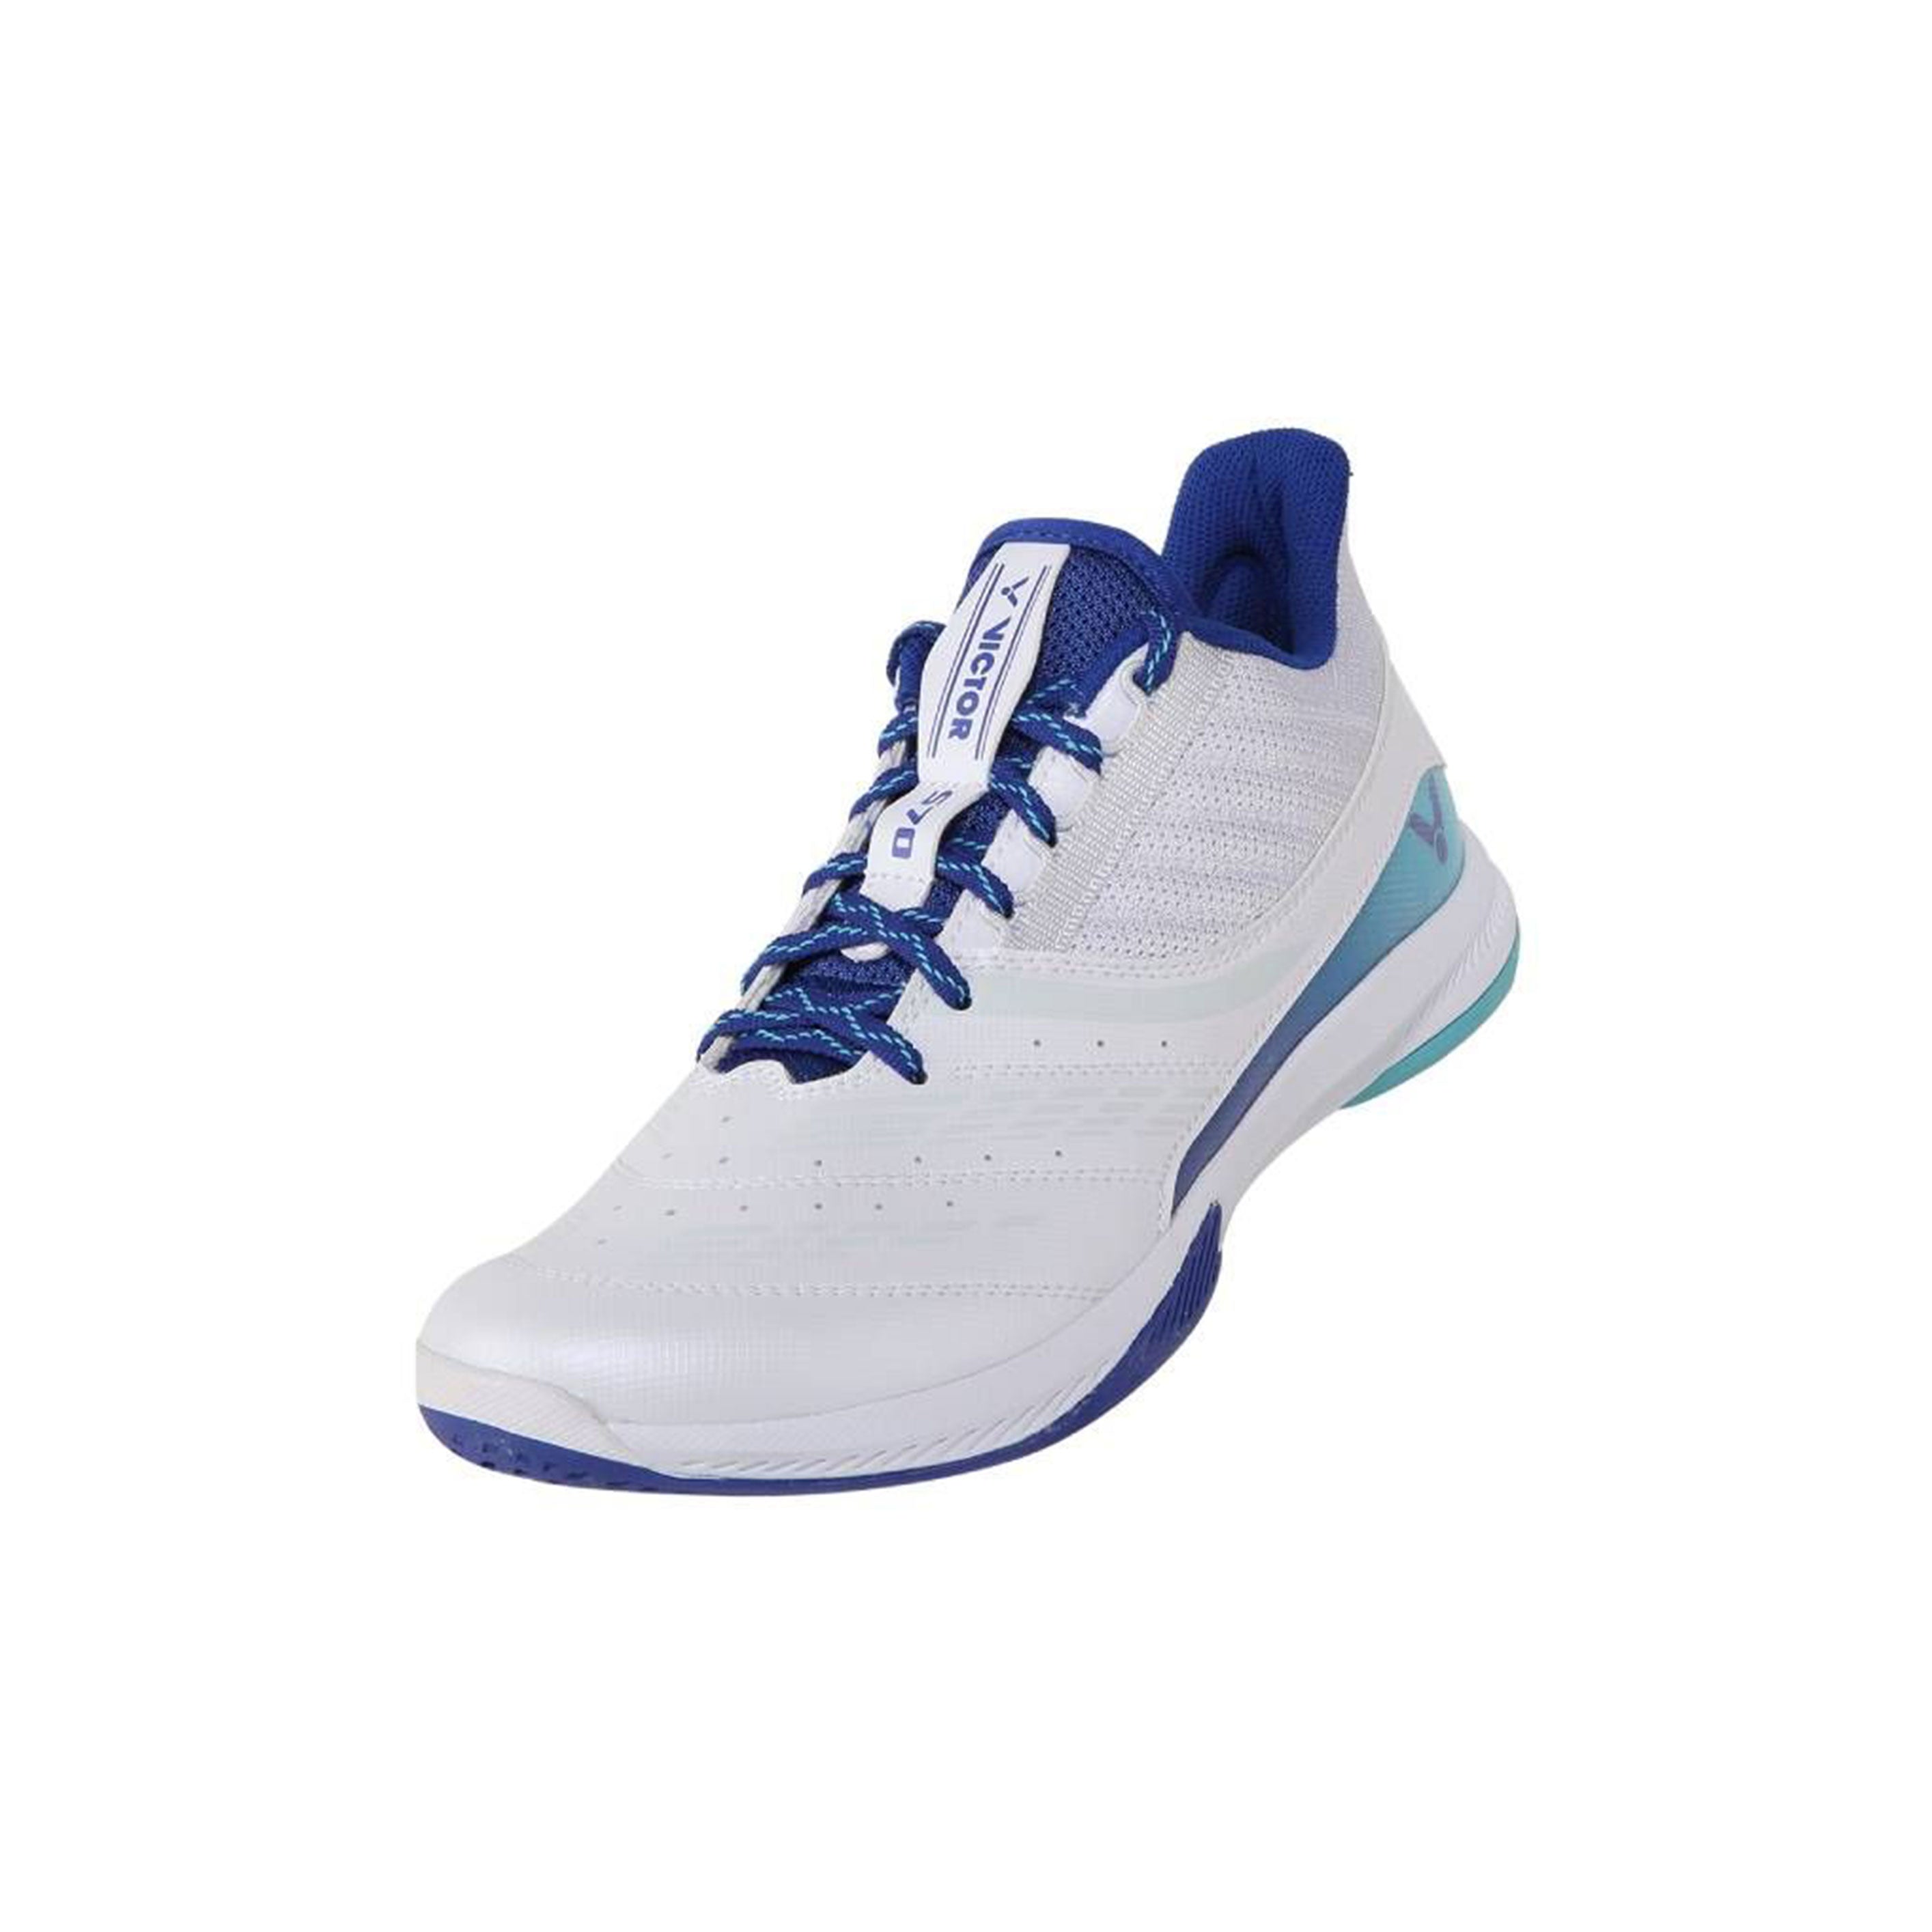 S70 A Speed Series Professional Badminton Shoes